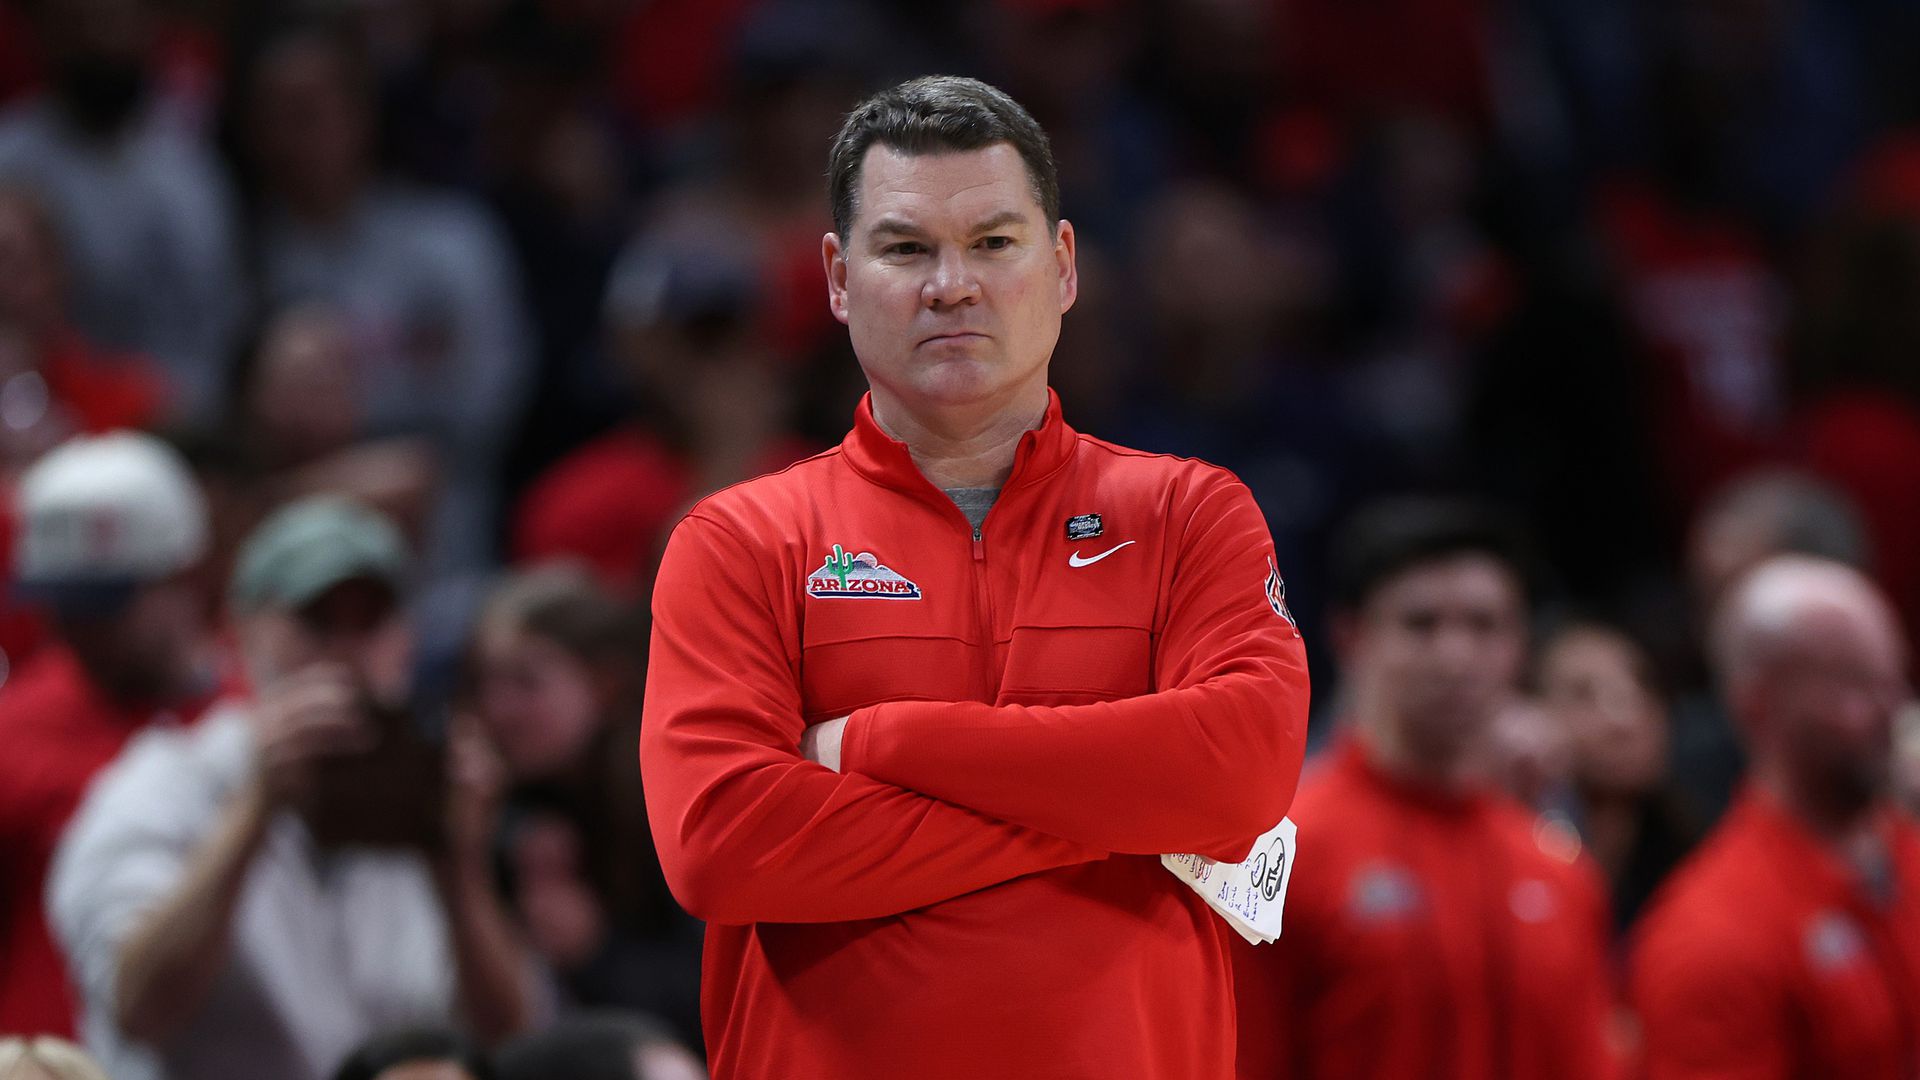 ncaa tournament: what tommy lloyd, arizona players said after sweet 16 loss to clemson